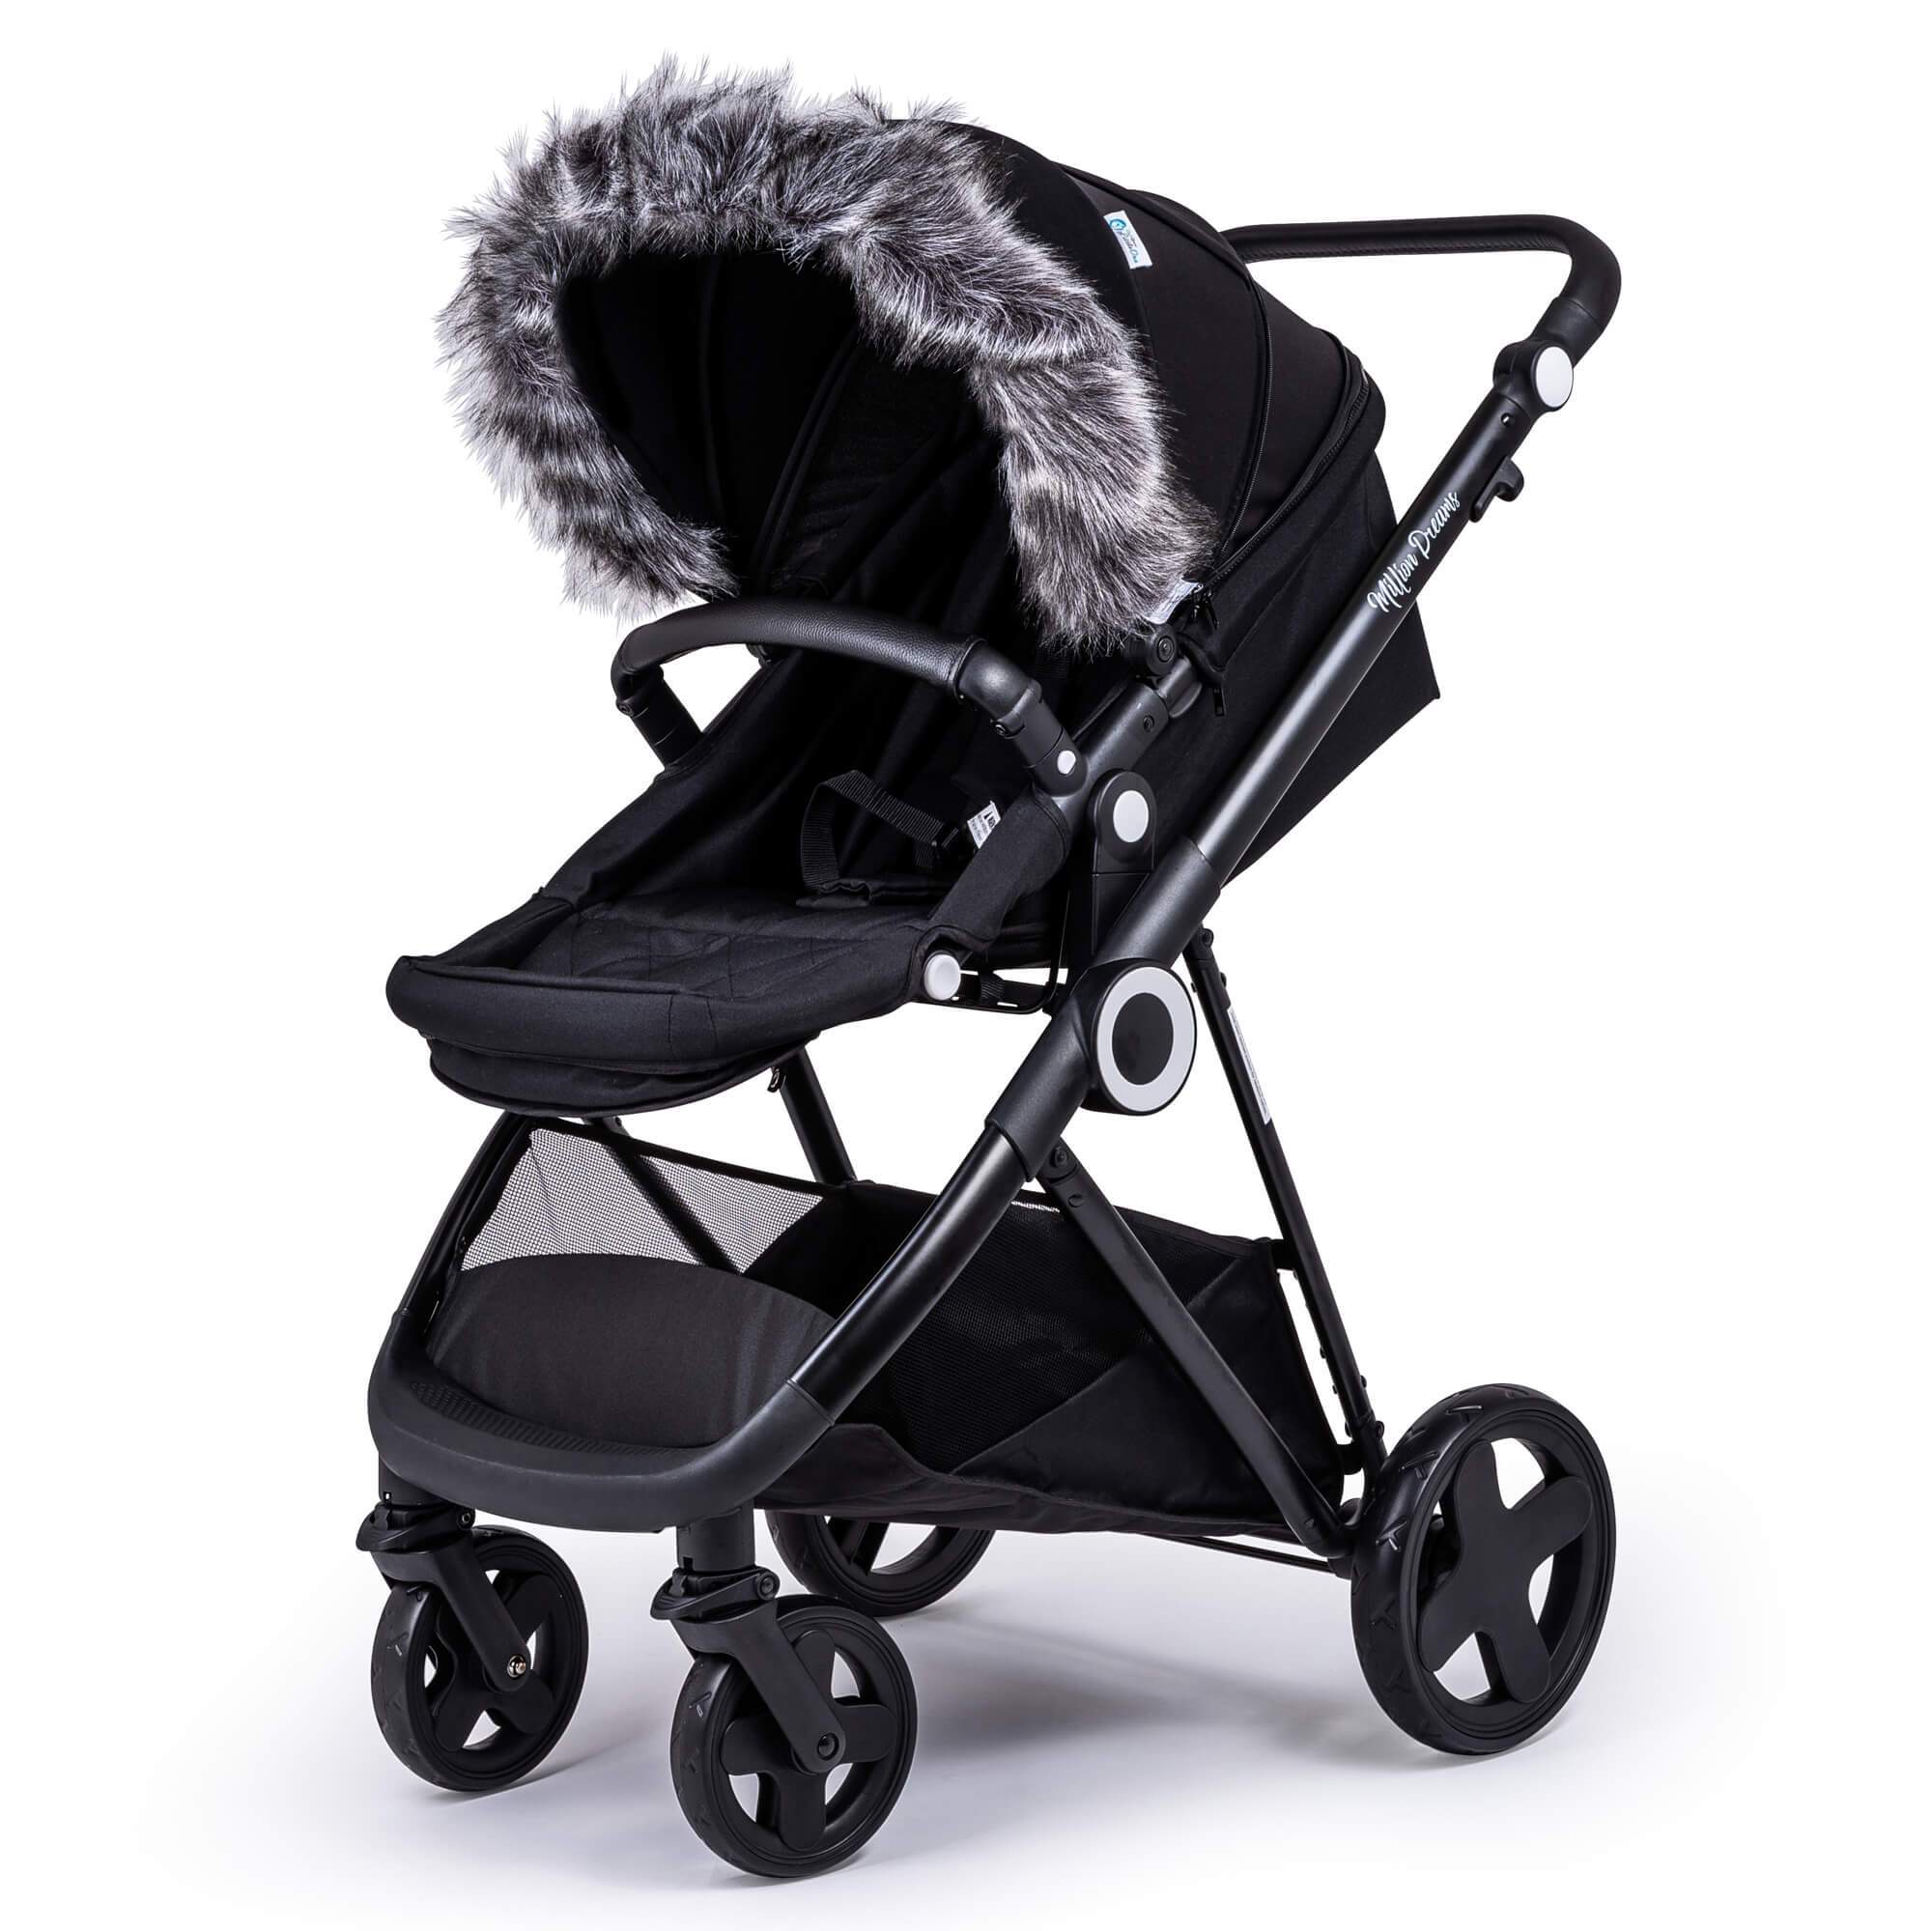 Pram Fur Hood Trim Attachment for Pushchair Compatible with Hybrid - Dark Grey / Fits All Models | For Your Little One